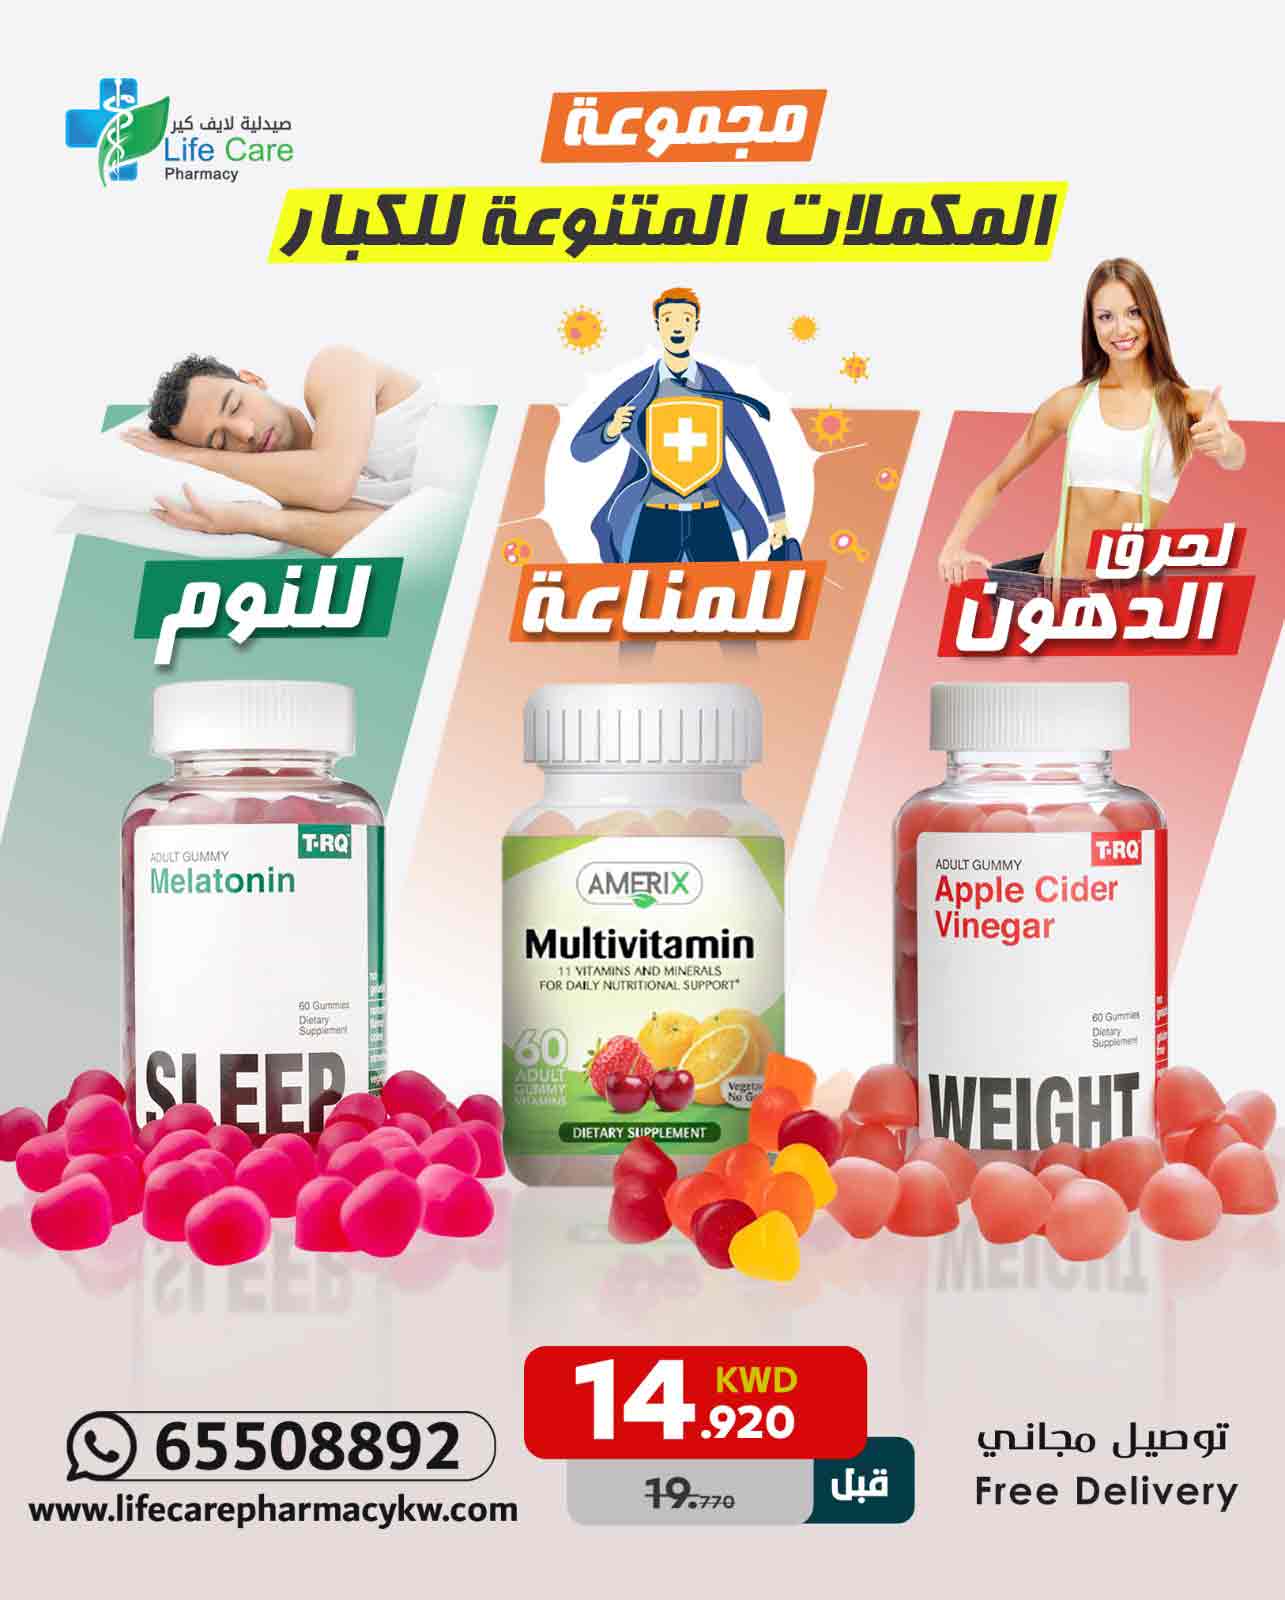 PACKAGE 94 - Life Care Pharmacy